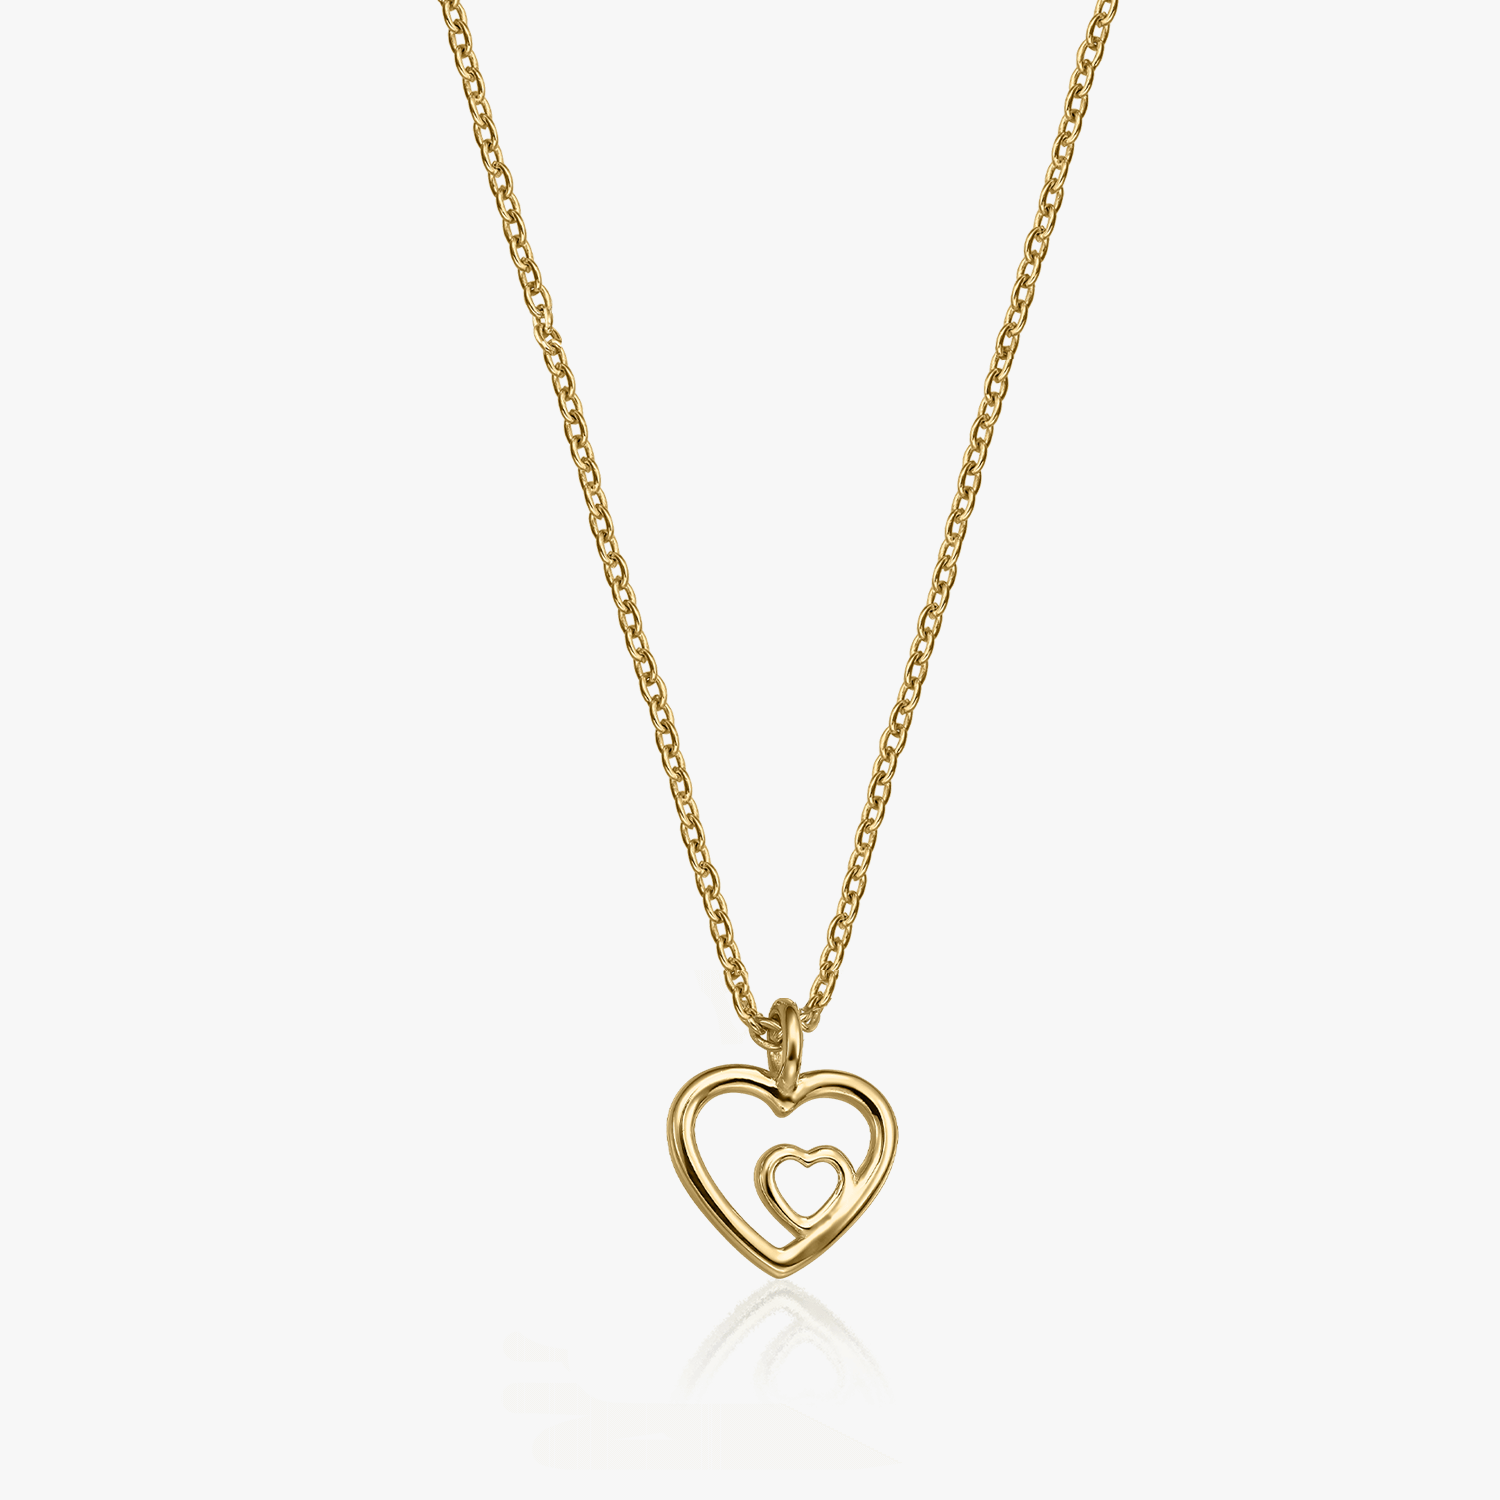 Golden In Love silver necklace